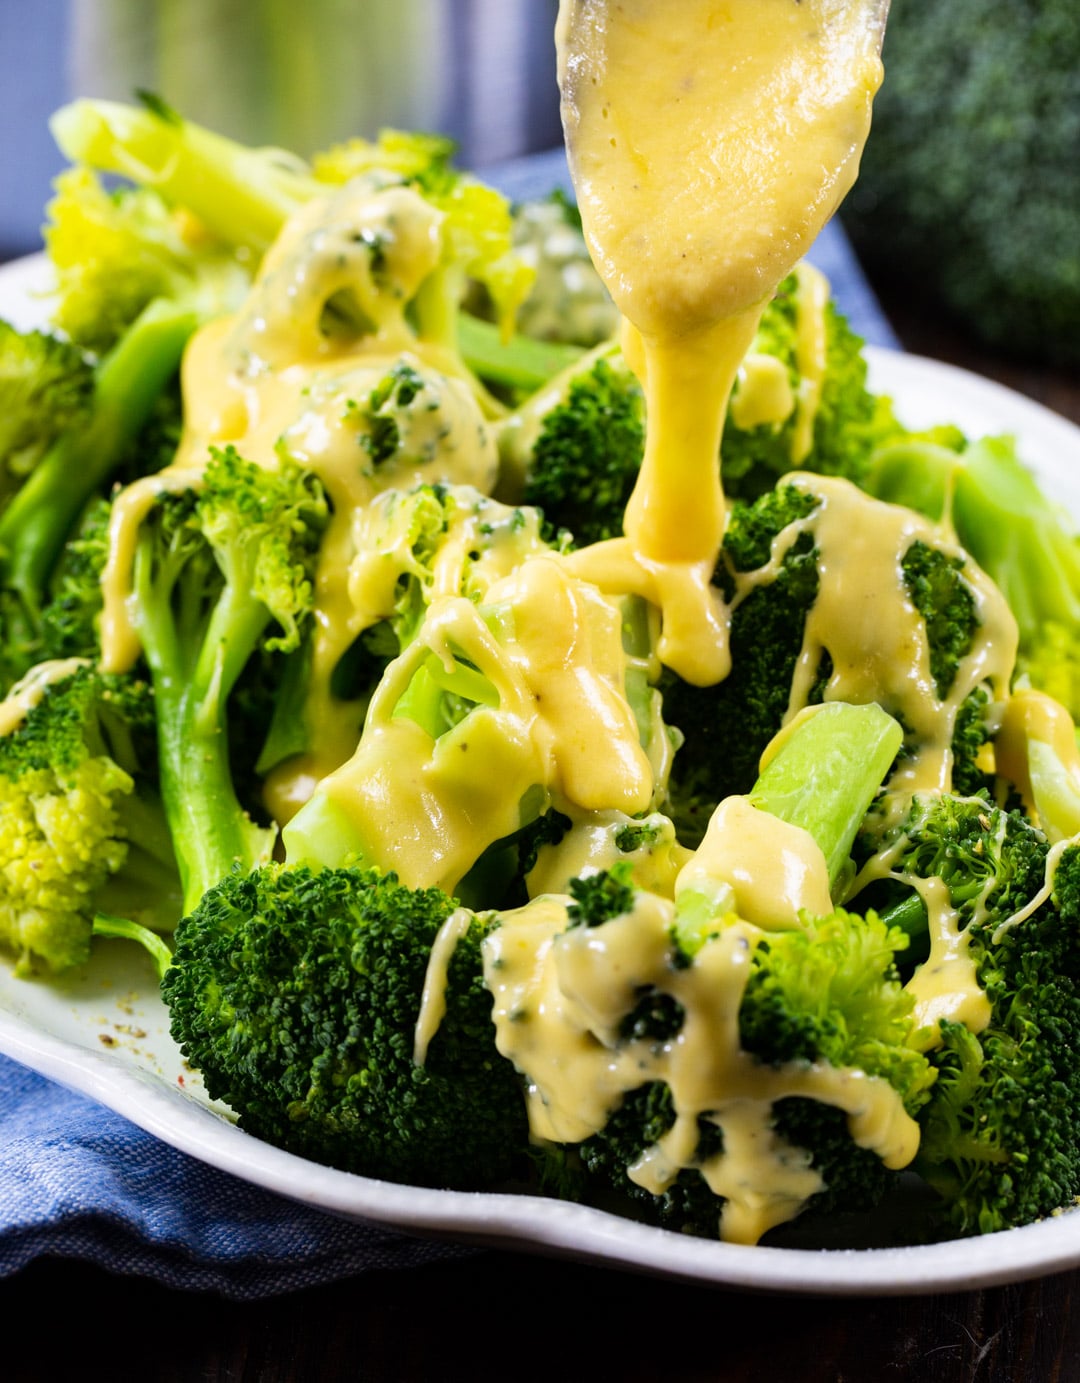 Cheese sauce being drizzled on broccoli.